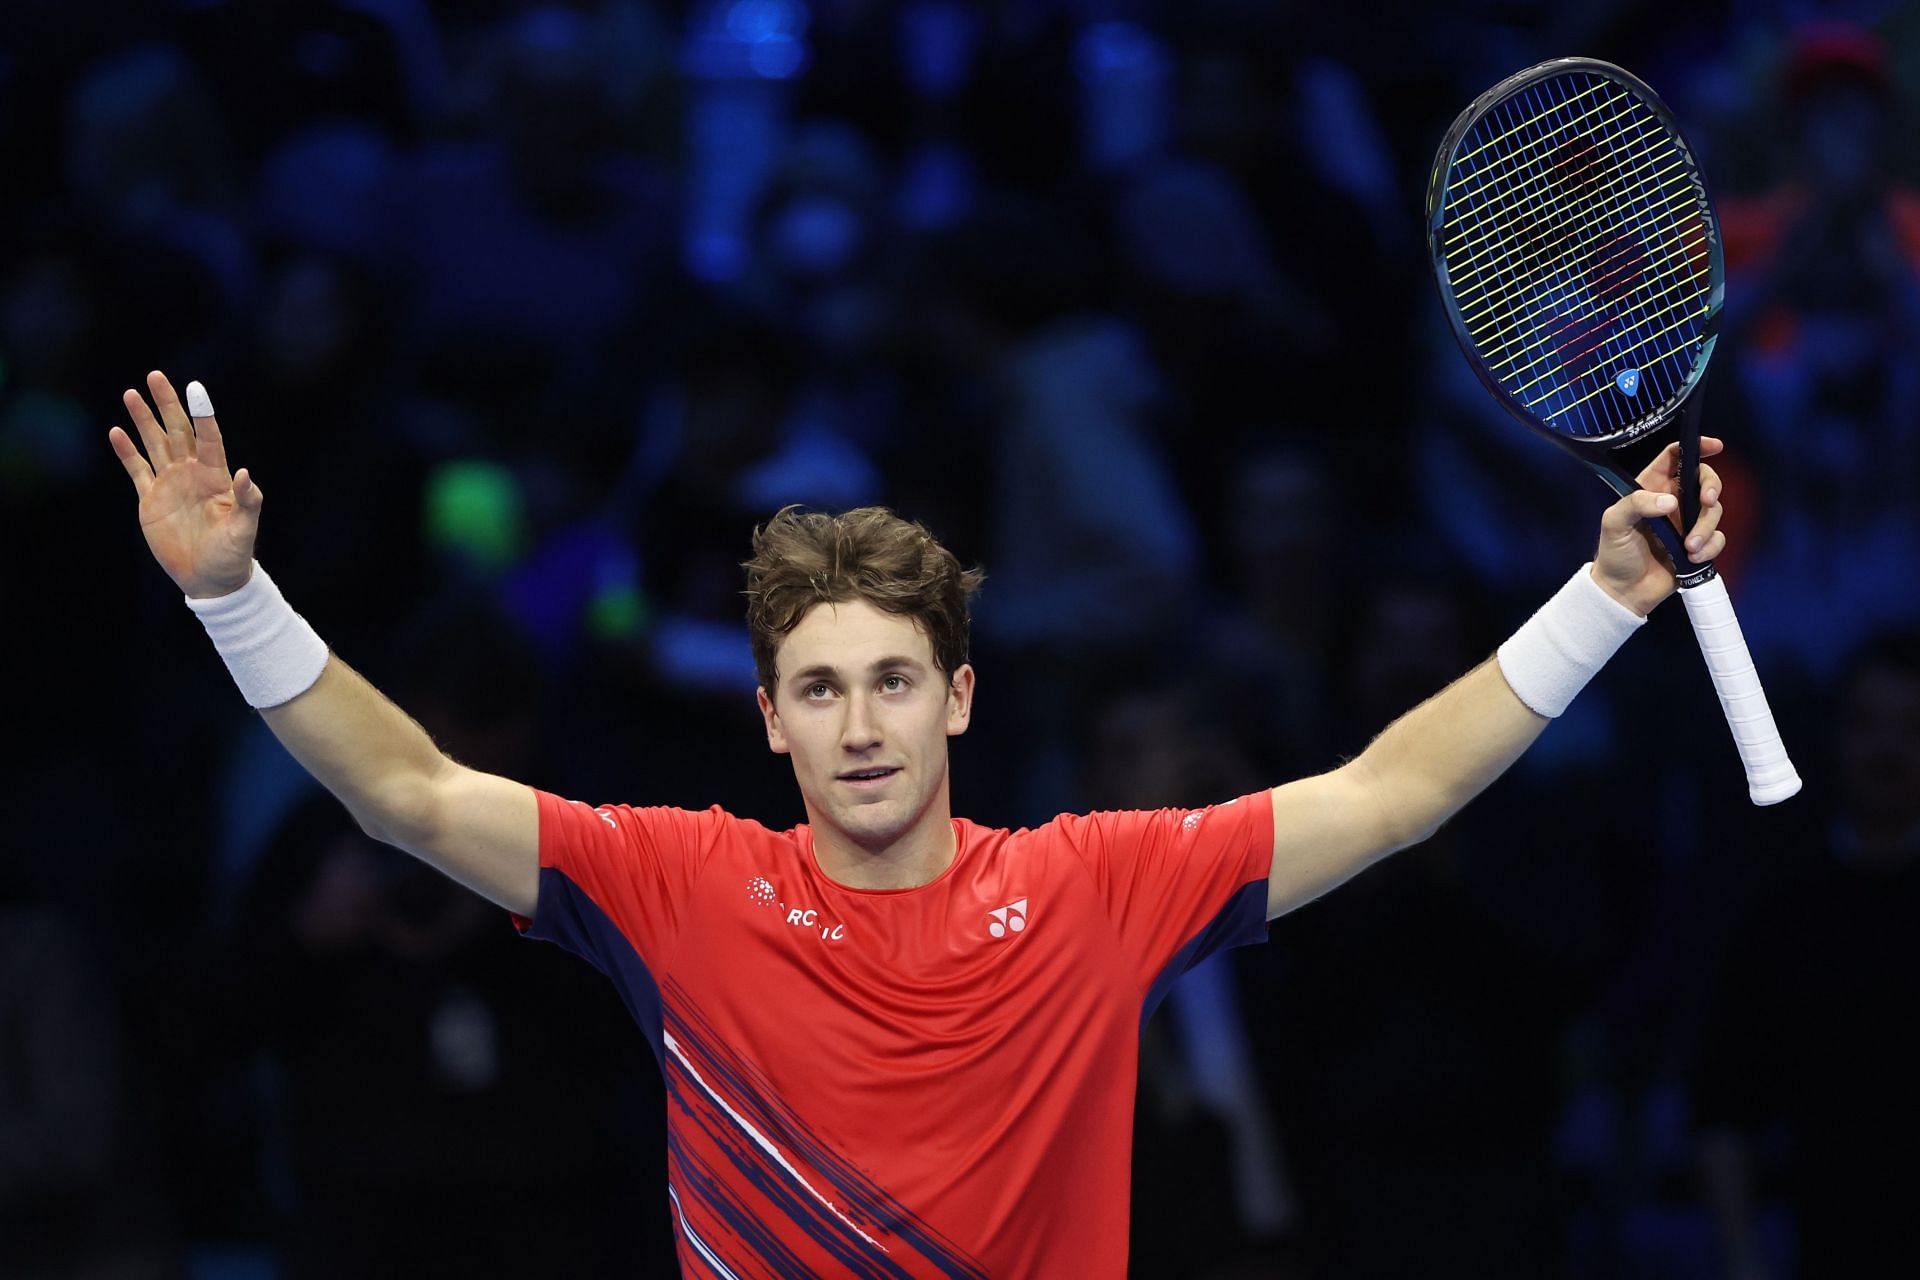 Casper Ruud celebrates his victory over Andrey Rublev in the ATP Finals